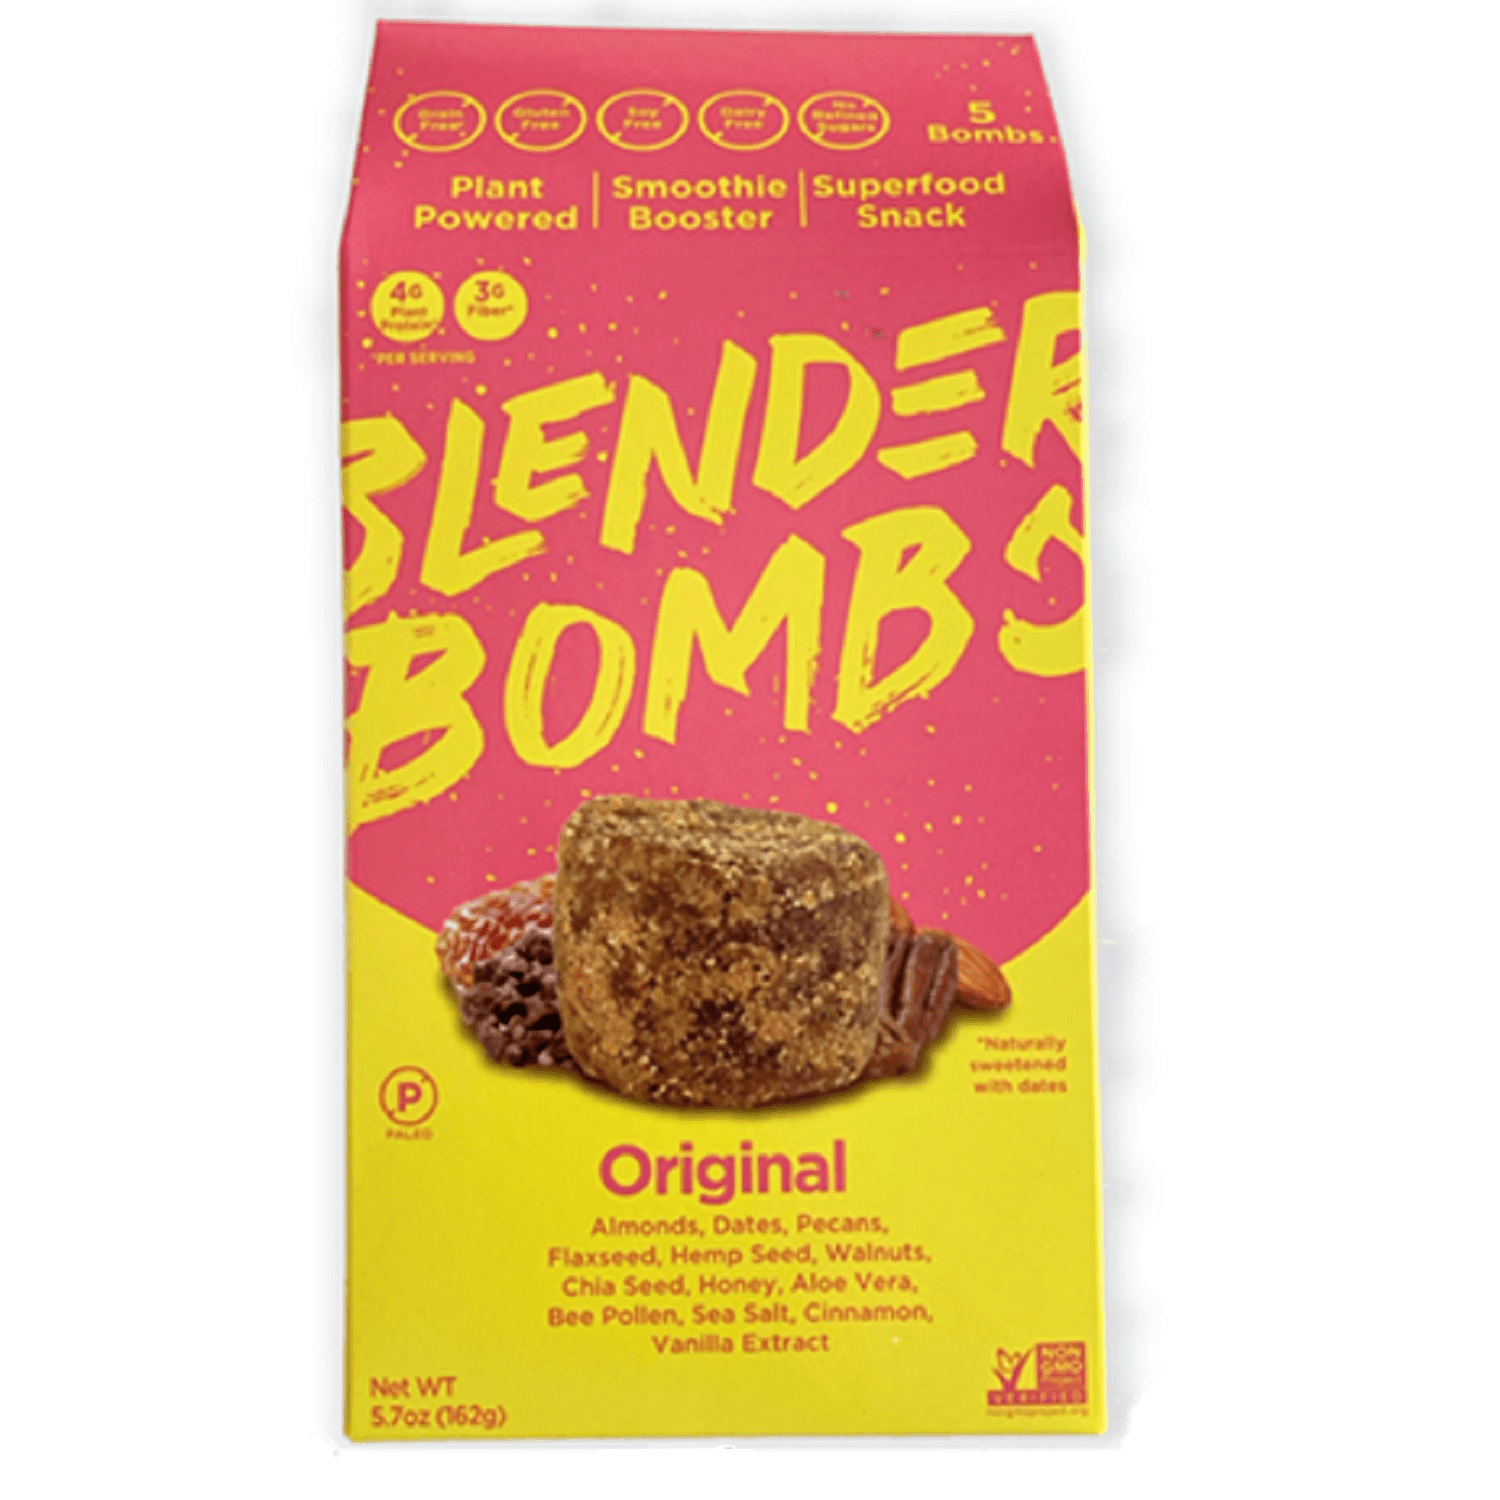 blender bombs provides the perfect ratio of fiber, fat, and protein. no